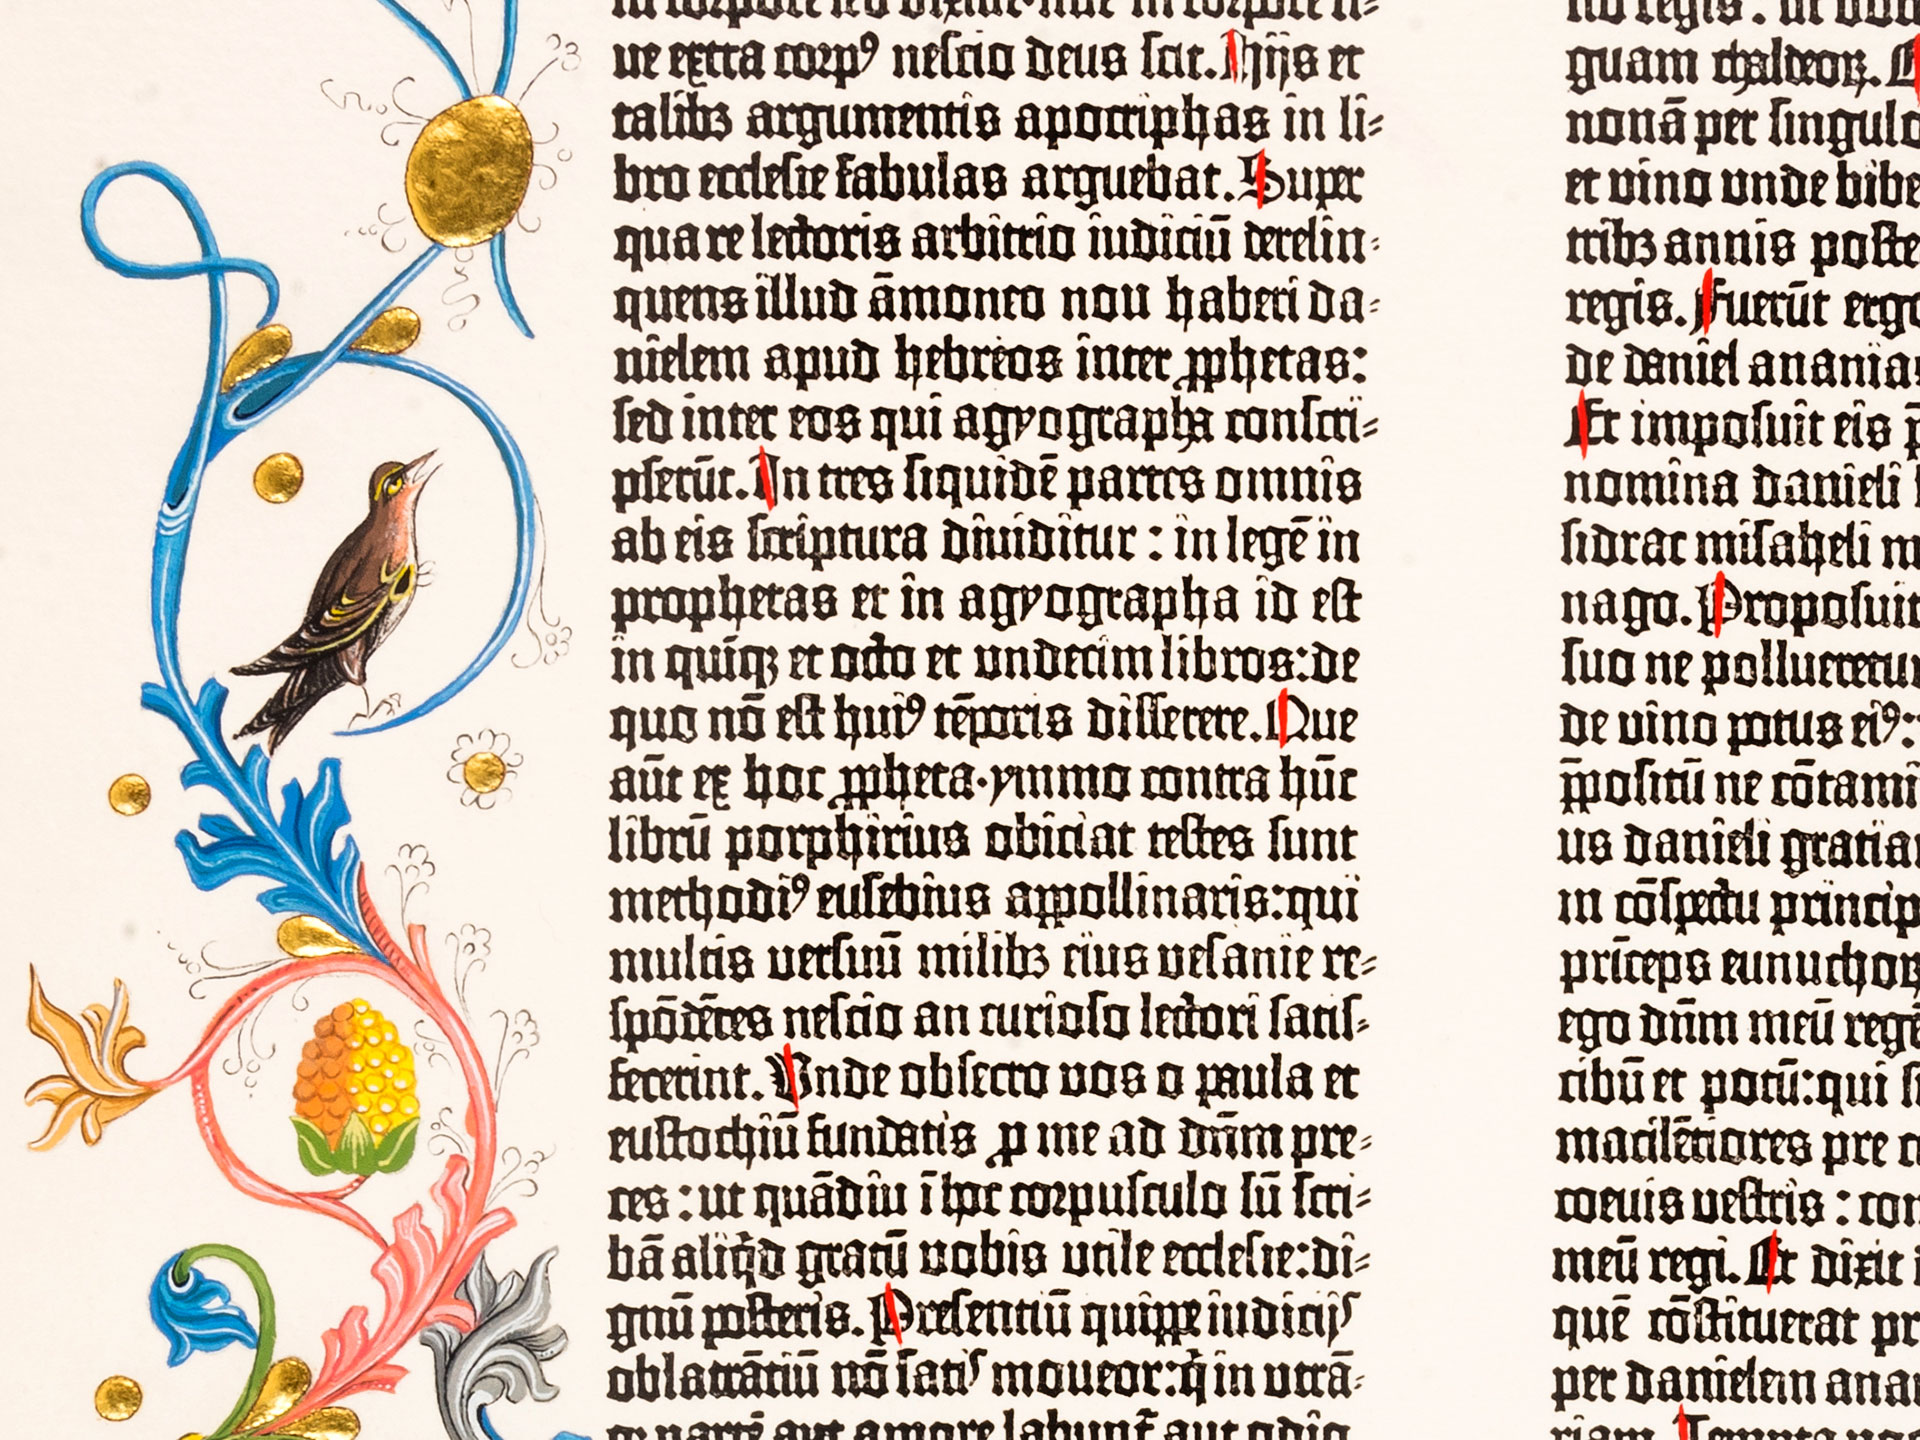 The Book of Daniel. Ornamental page from the Berlin Gutenberg Bible